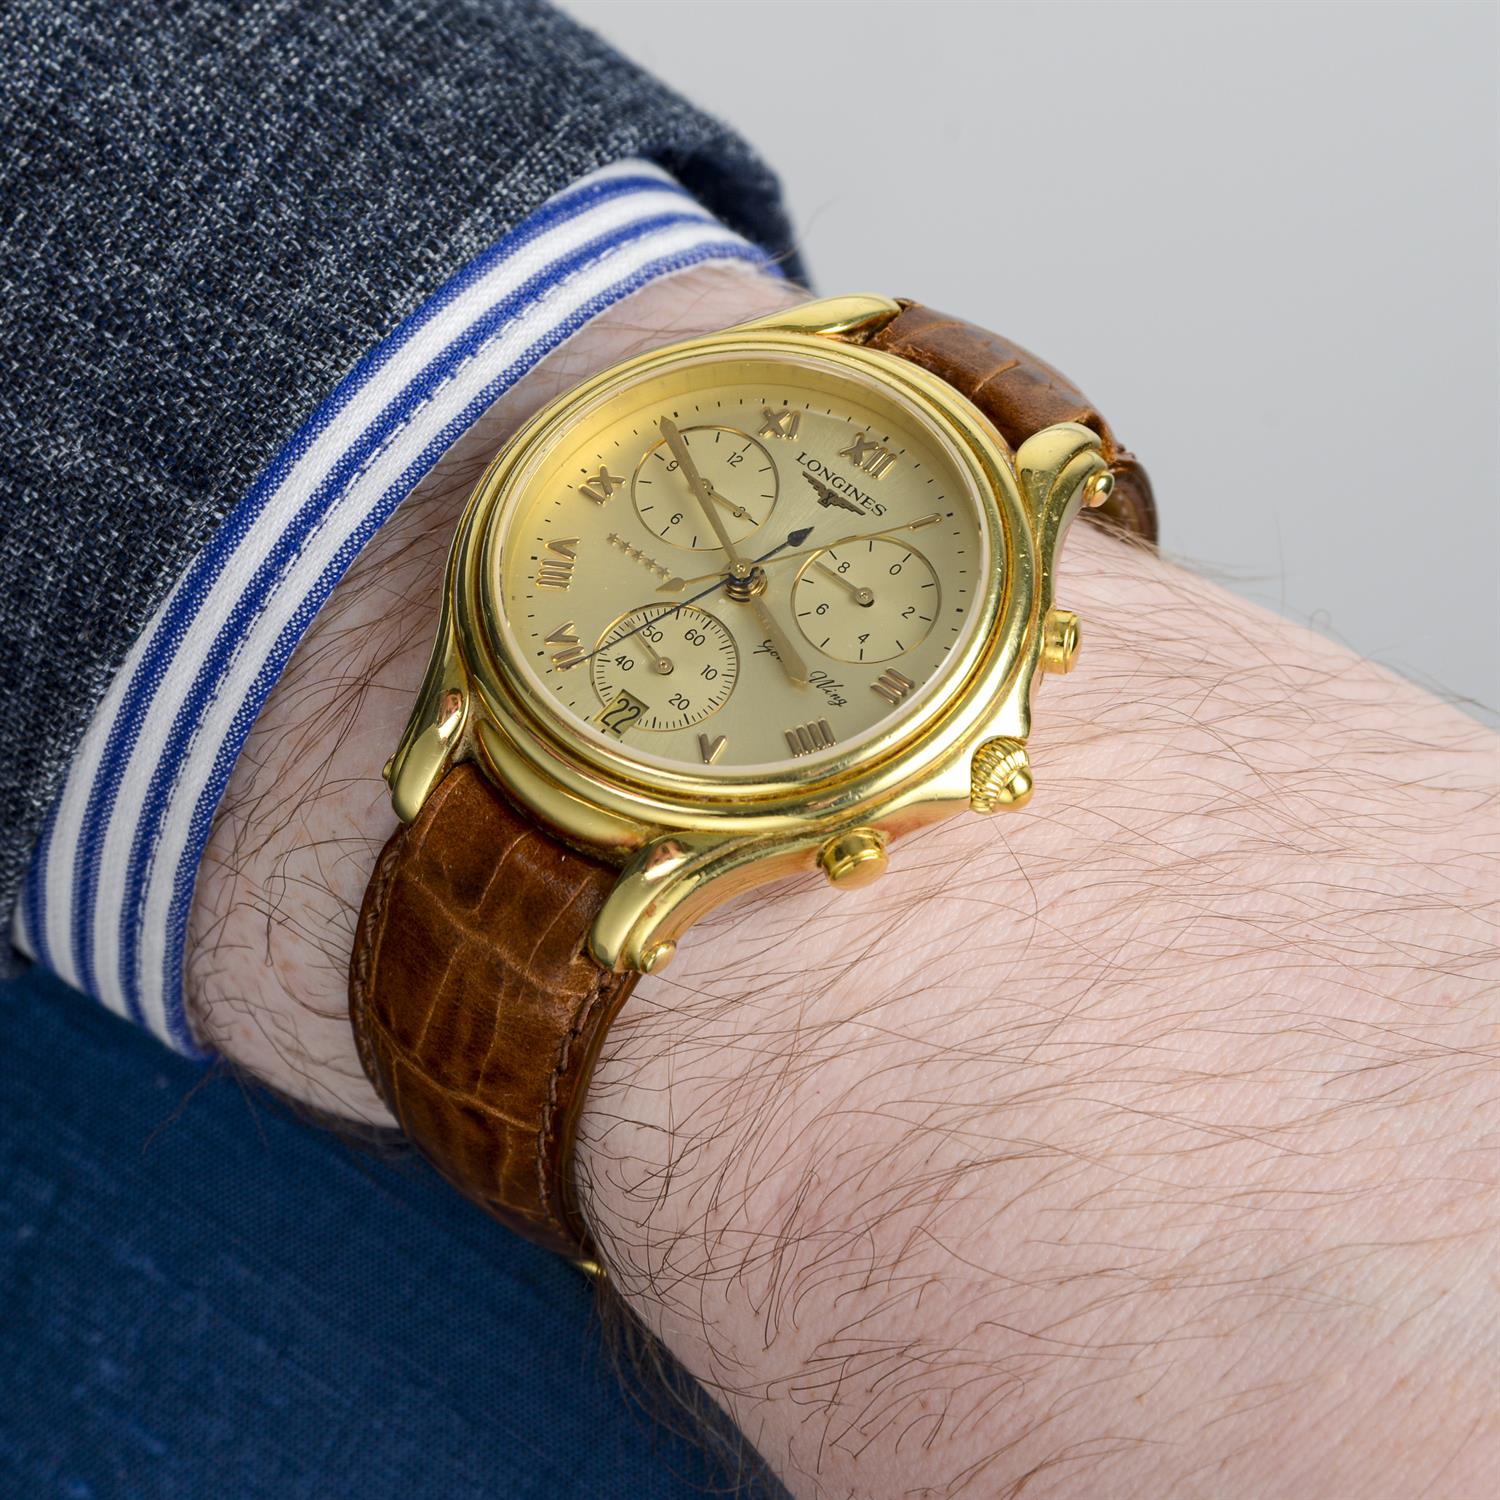 Longines - a Golden Wing chronograph watch, 38mm. - Image 5 of 5